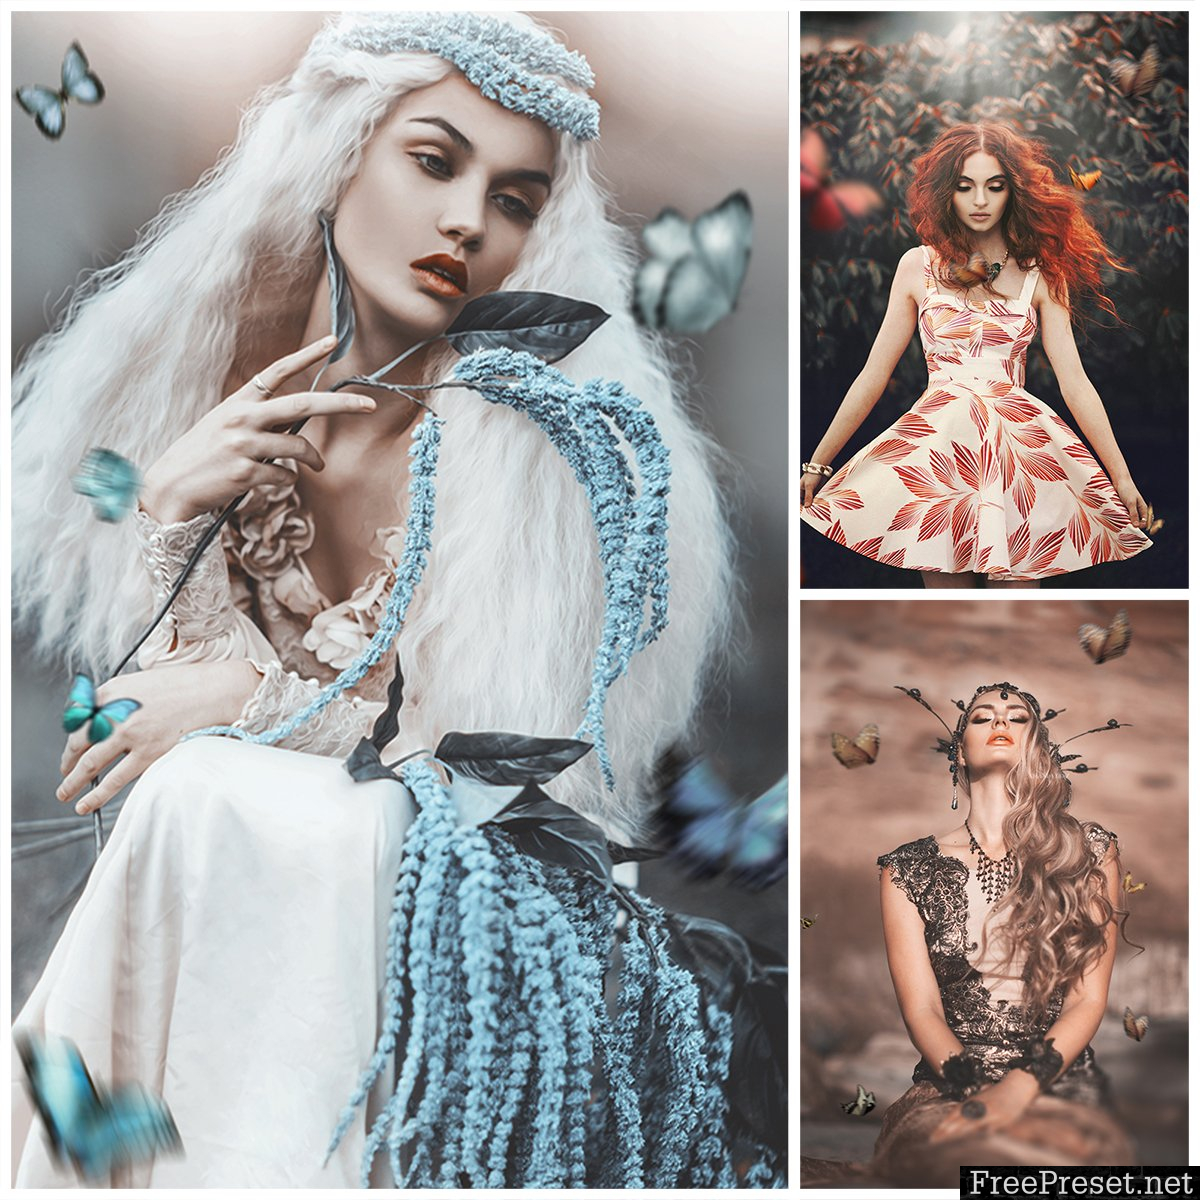  Amanda Diaz - Butterfly Overlays Collection 